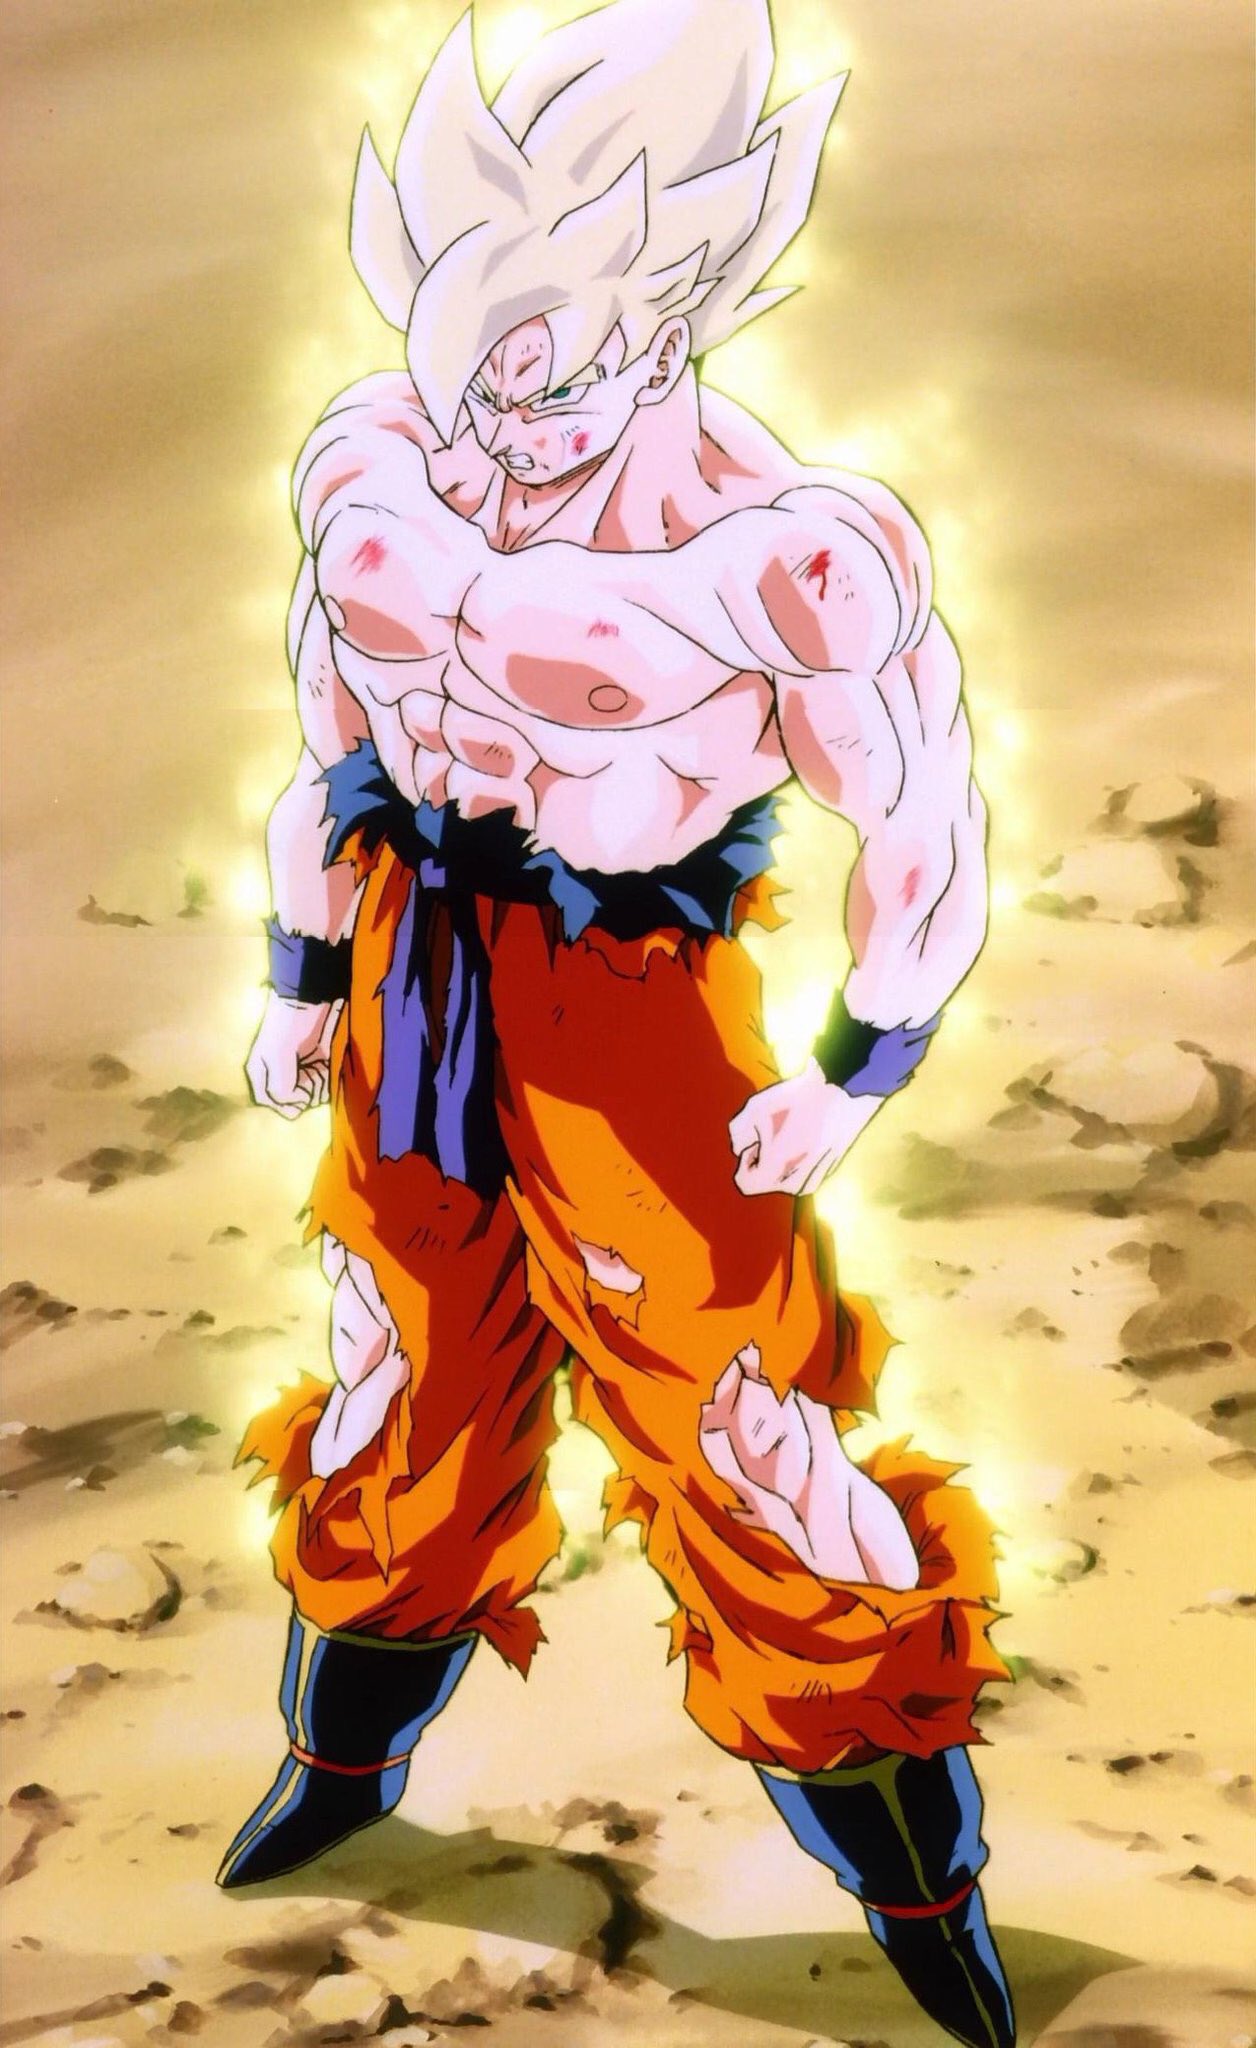 SLO on X: Whoever did the art for this Super Saiyan Goku, please do more  🙏 the hair, the muscles, it's so fucking cool.  / X